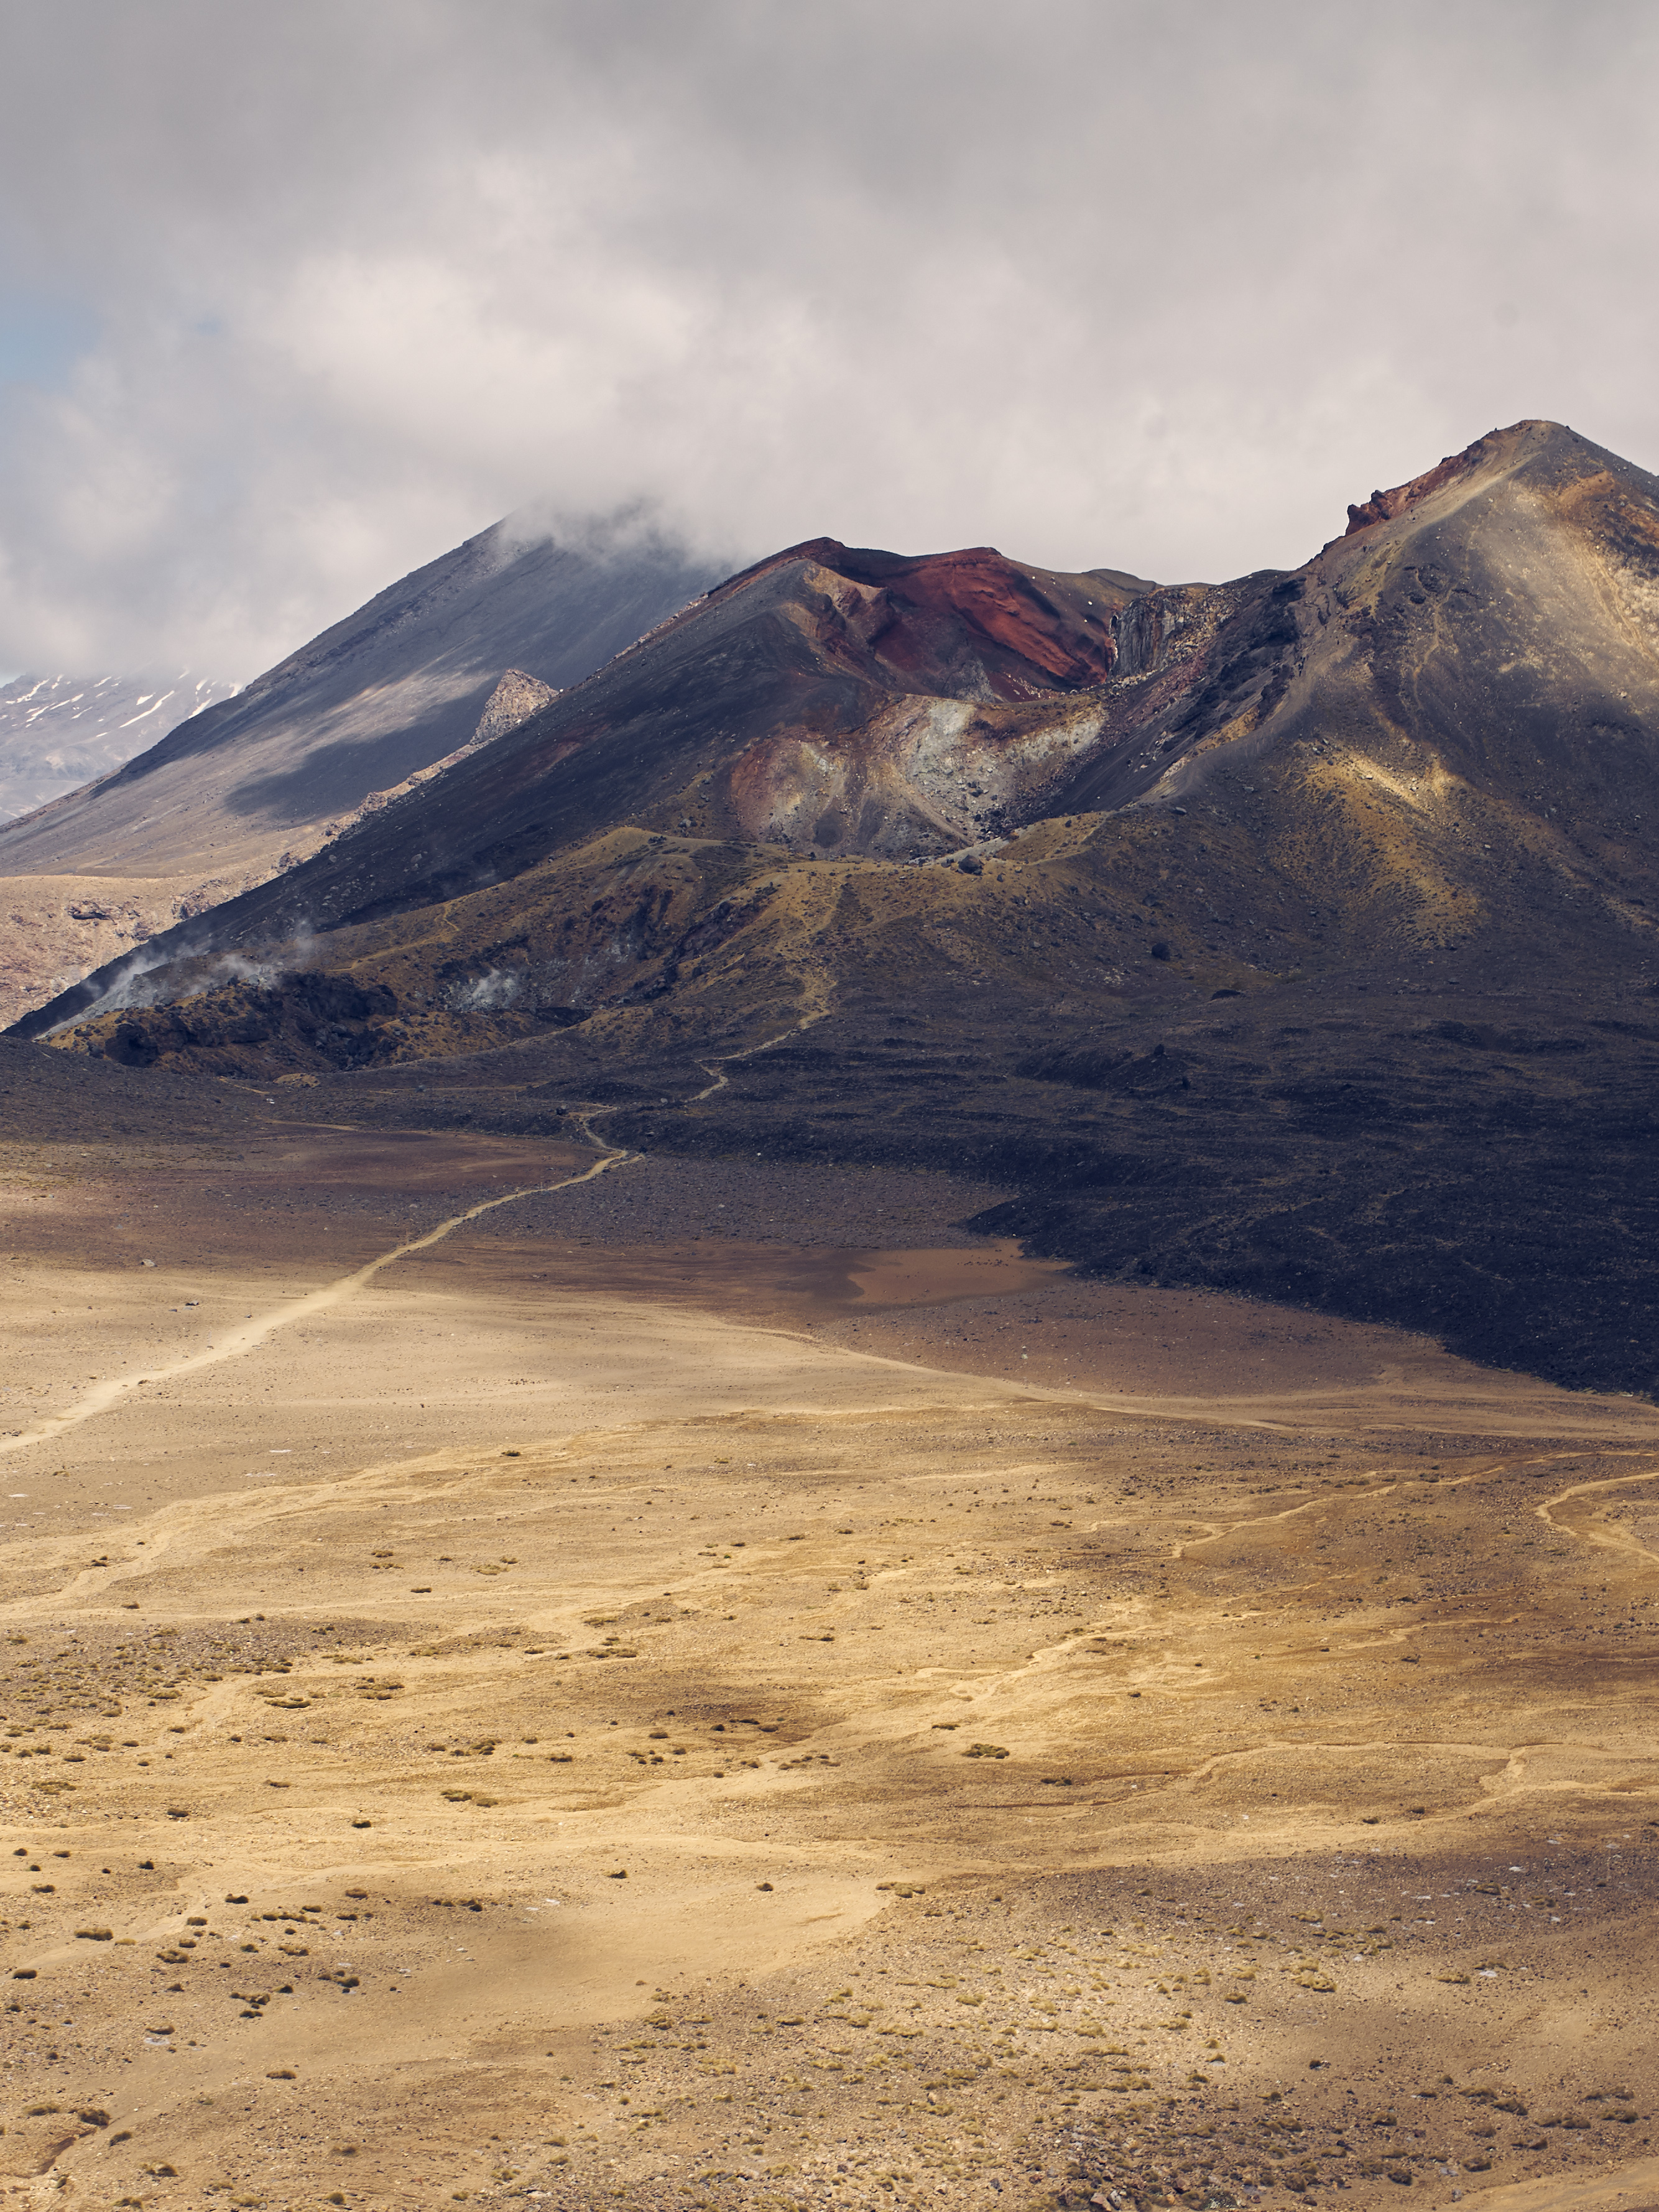 View from a panoramic viewpoint of ochre-colored plains and the red crater in the volcanic landscape of the Tongariro Crossing in the background